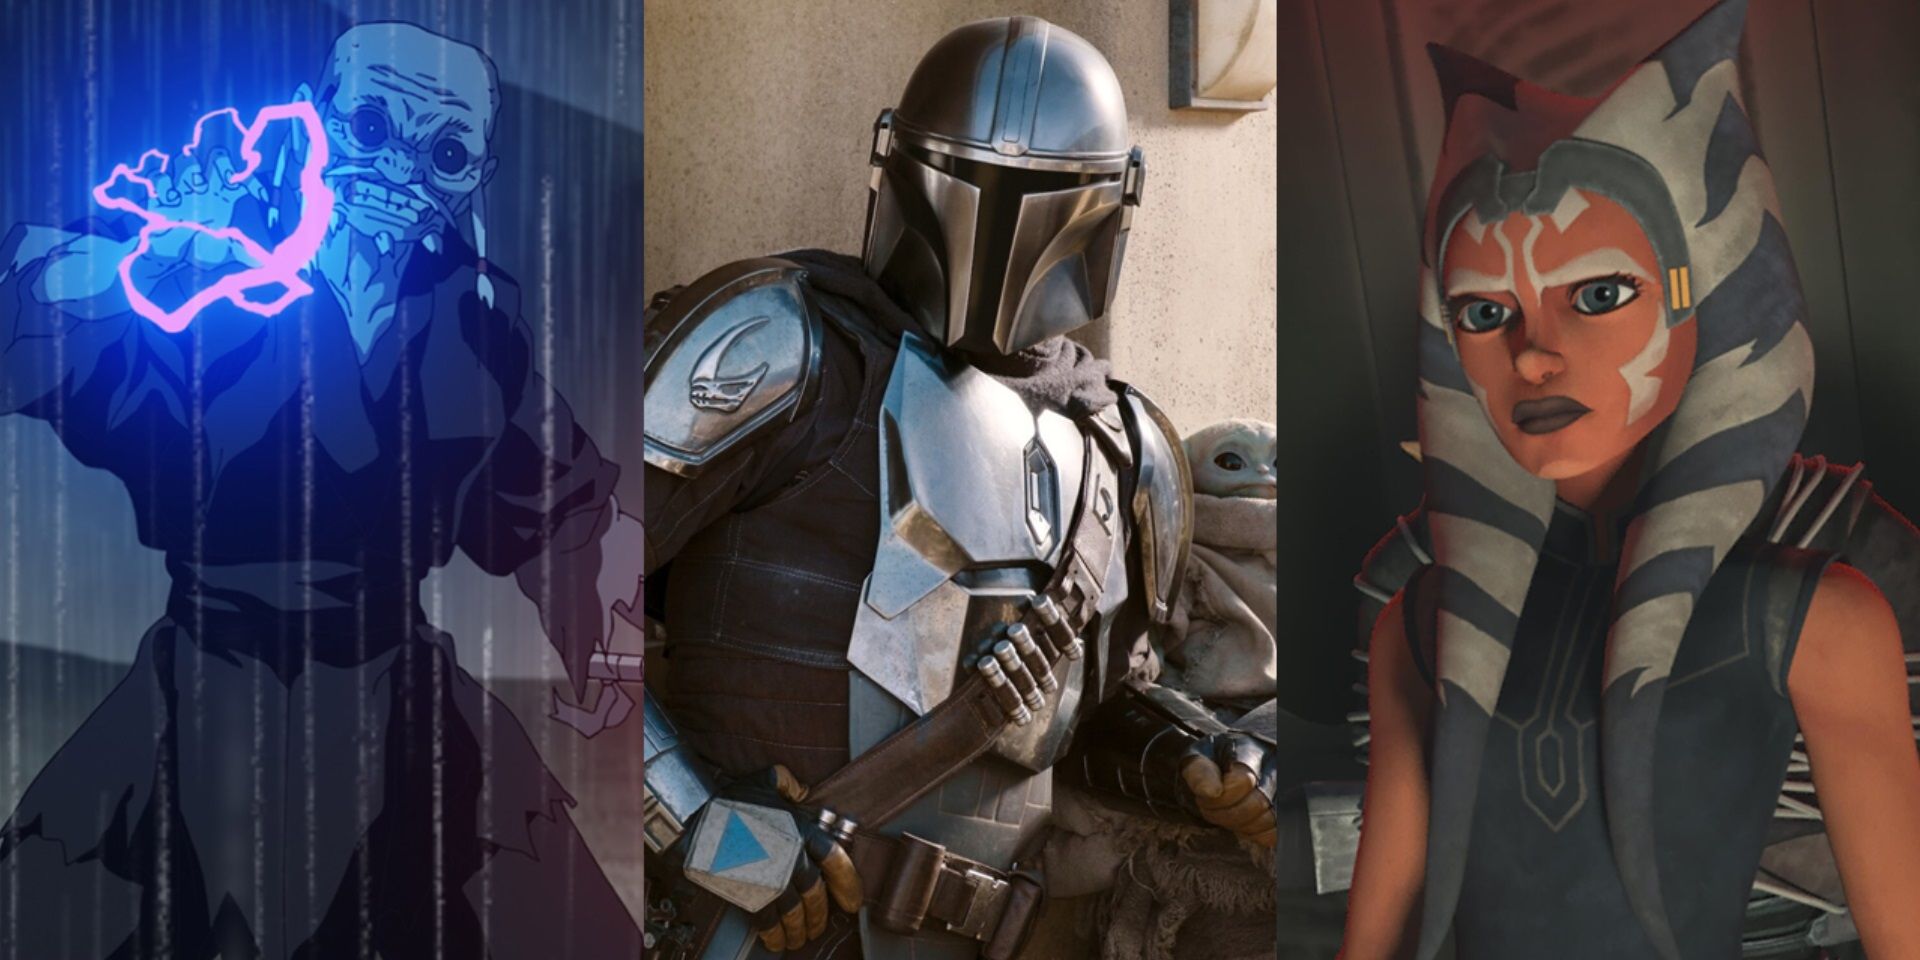 Split image of a Force user in Star Wars Visions, Mando in The Mandalorian, and Ahsoka in The Clone Wars